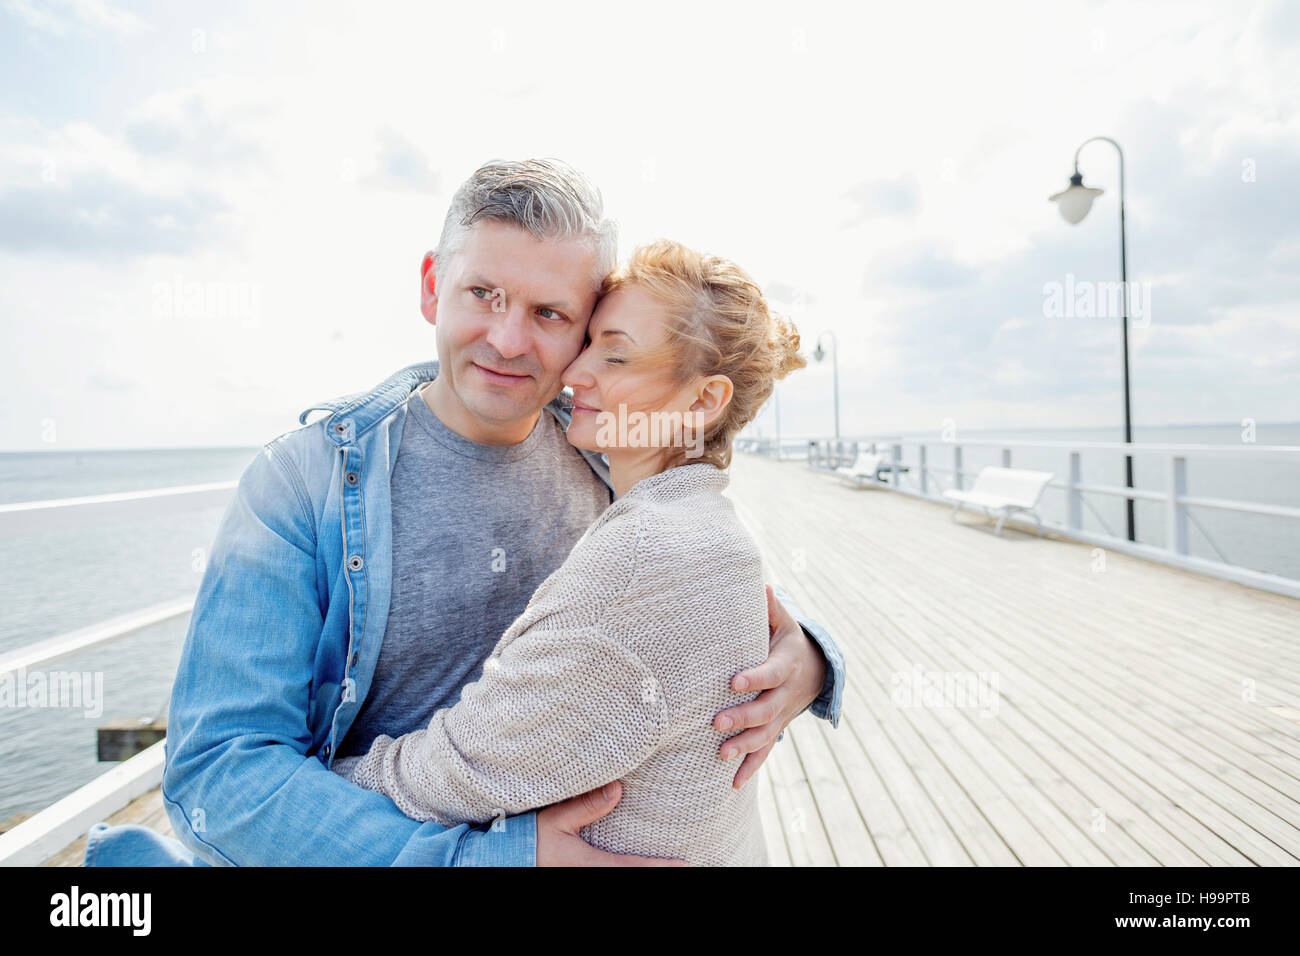 Couple on jetty embracing Stock Photo